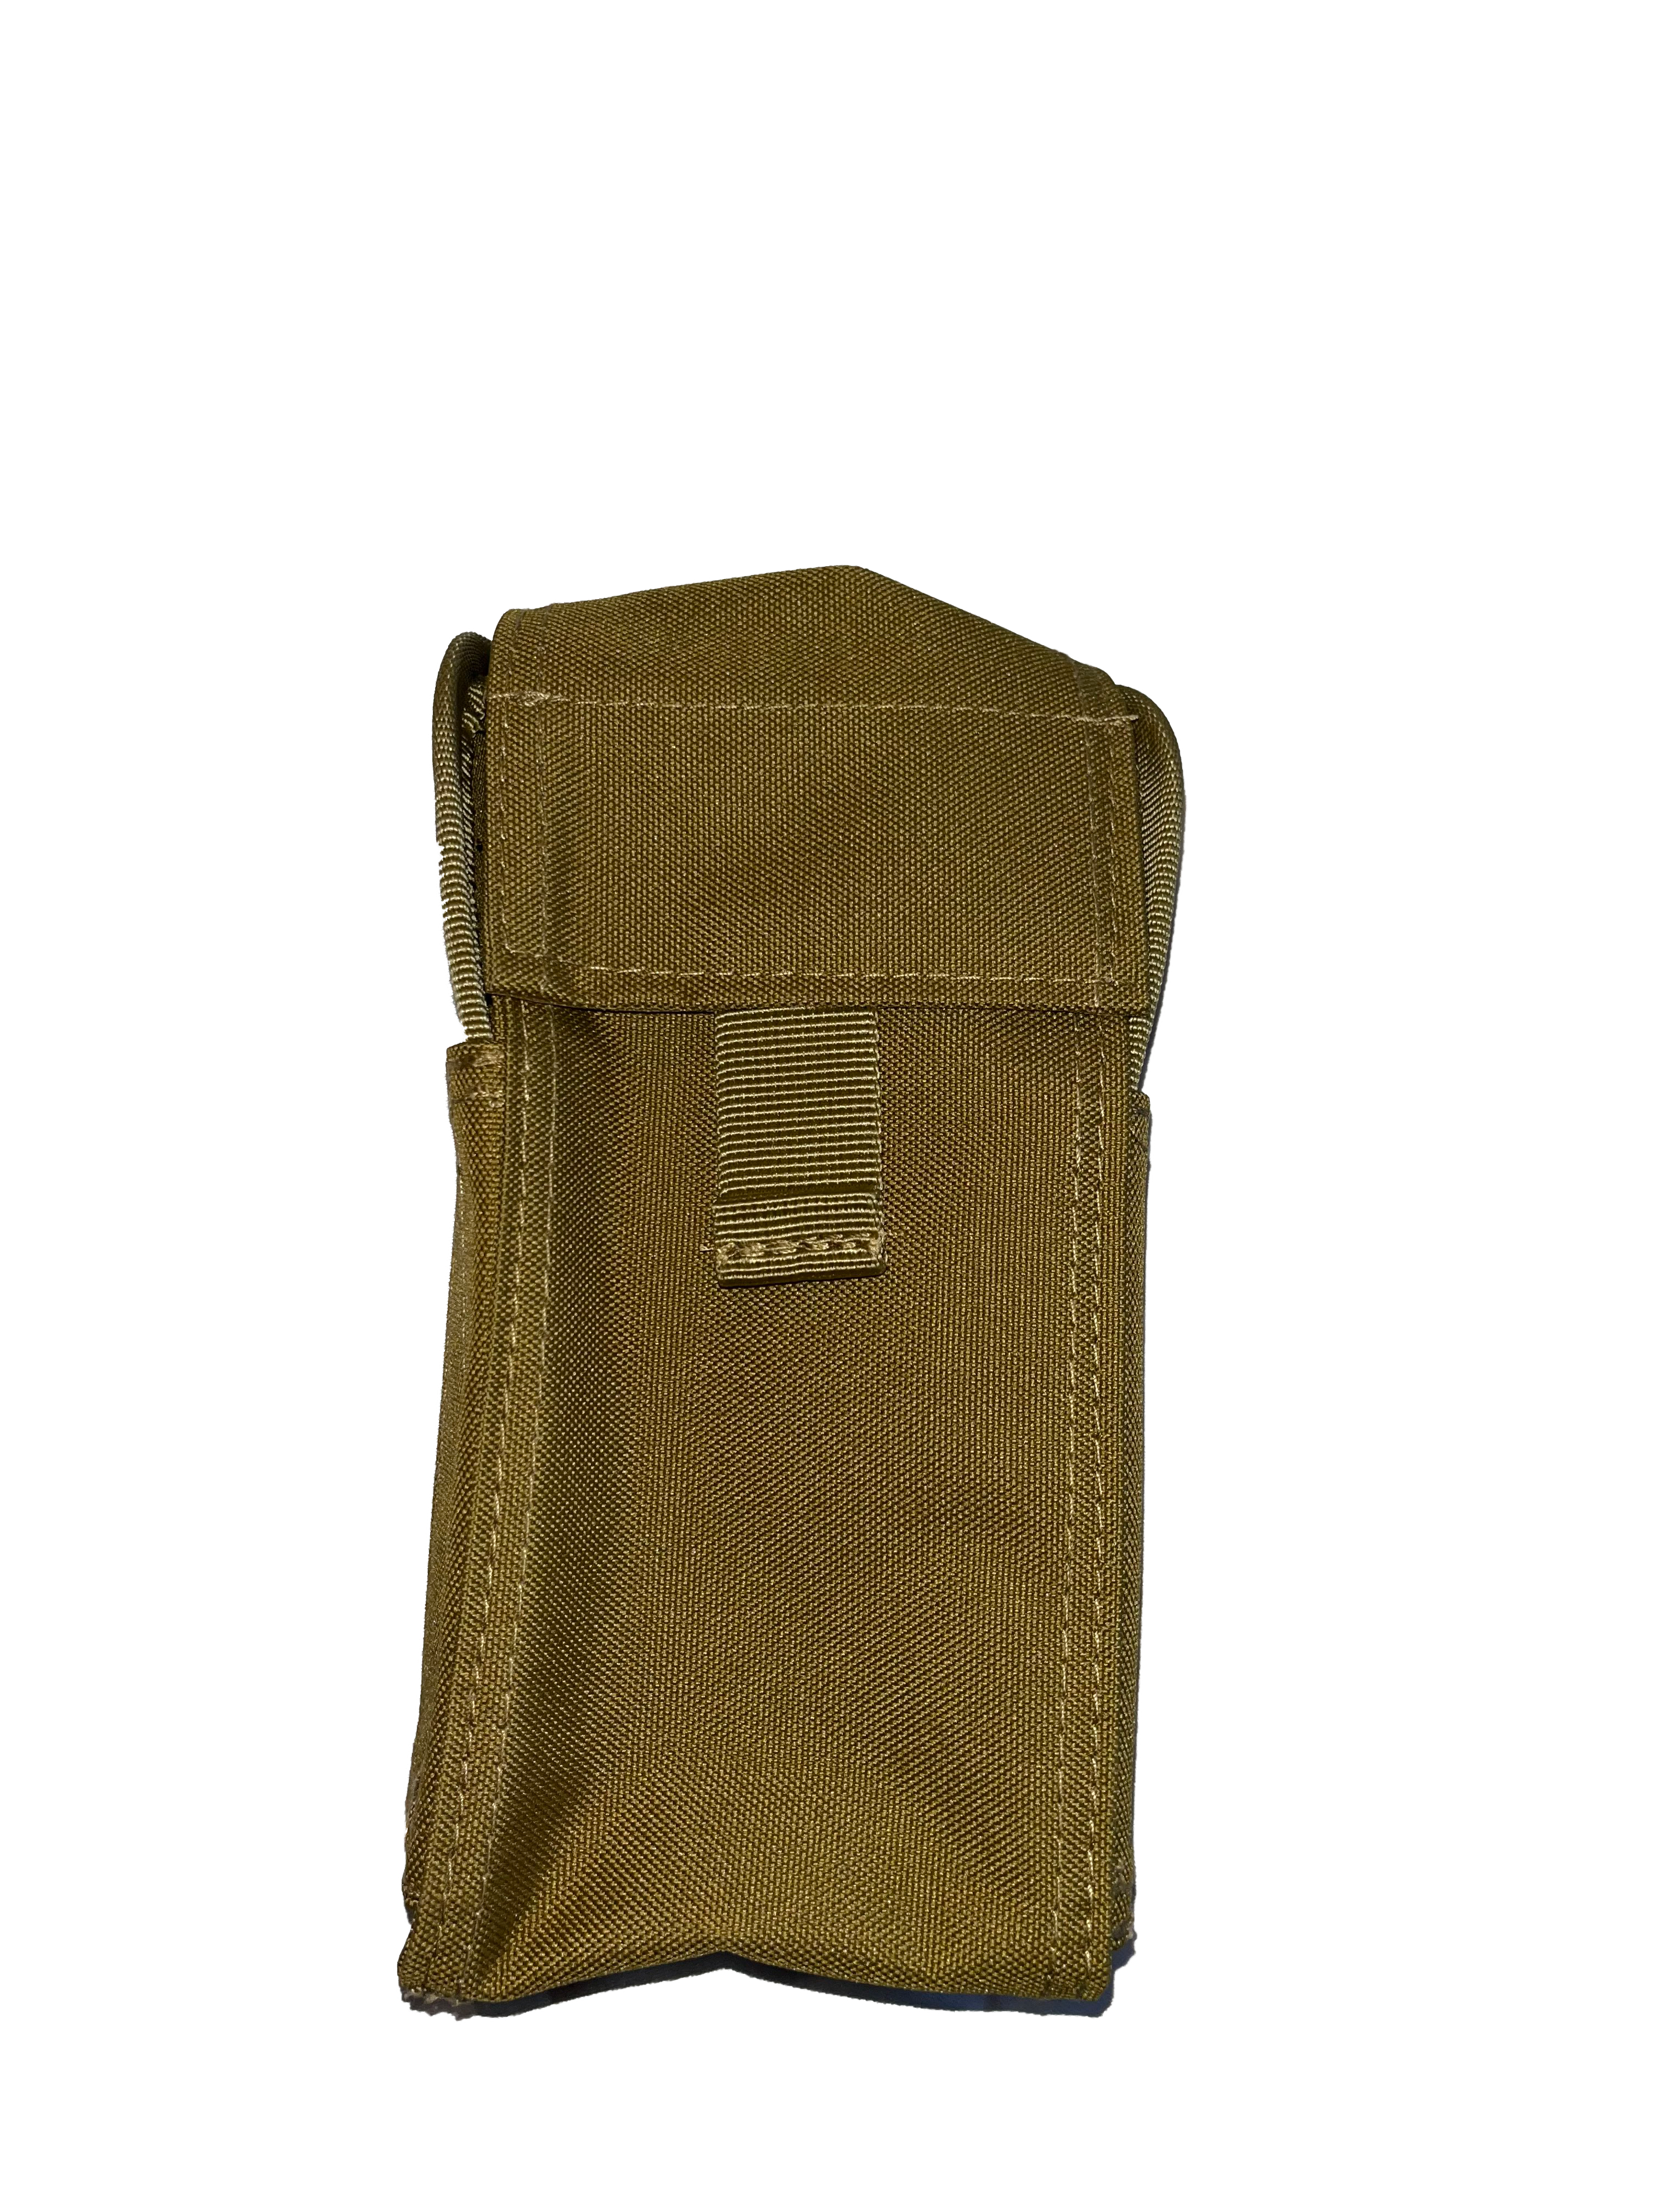 Coyote Brown Shotgun Shell Carrier (Molle)